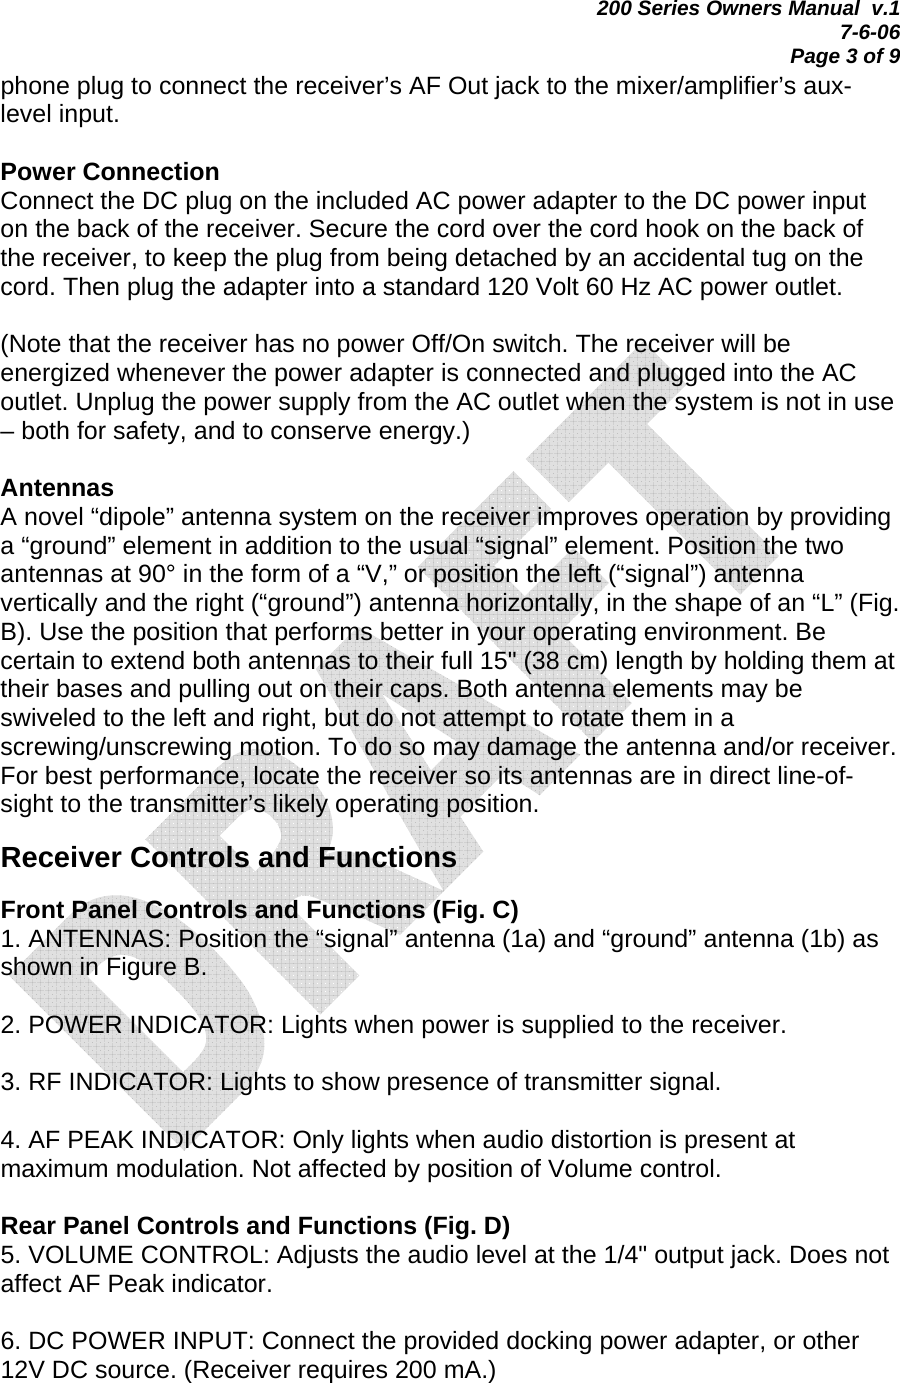 200 Series Owners Manual  v.1 7-6-06 Page 3 of 9 phone plug to connect the receiver’s AF Out jack to the mixer/amplifier’s aux-level input.  Power Connection Connect the DC plug on the included AC power adapter to the DC power input on the back of the receiver. Secure the cord over the cord hook on the back of the receiver, to keep the plug from being detached by an accidental tug on the cord. Then plug the adapter into a standard 120 Volt 60 Hz AC power outlet.   (Note that the receiver has no power Off/On switch. The receiver will be energized whenever the power adapter is connected and plugged into the AC outlet. Unplug the power supply from the AC outlet when the system is not in use – both for safety, and to conserve energy.)  Antennas A novel “dipole” antenna system on the receiver improves operation by providing a “ground” element in addition to the usual “signal” element. Position the two antennas at 90° in the form of a “V,” or position the left (“signal”) antenna vertically and the right (“ground”) antenna horizontally, in the shape of an “L” (Fig. B). Use the position that performs better in your operating environment. Be certain to extend both antennas to their full 15&quot; (38 cm) length by holding them at their bases and pulling out on their caps. Both antenna elements may be swiveled to the left and right, but do not attempt to rotate them in a screwing/unscrewing motion. To do so may damage the antenna and/or receiver. For best performance, locate the receiver so its antennas are in direct line-of-sight to the transmitter’s likely operating position.  Receiver Controls and Functions  Front Panel Controls and Functions (Fig. C) 1. ANTENNAS: Position the “signal” antenna (1a) and “ground” antenna (1b) as shown in Figure B.  2. POWER INDICATOR: Lights when power is supplied to the receiver.  3. RF INDICATOR: Lights to show presence of transmitter signal.  4. AF PEAK INDICATOR: Only lights when audio distortion is present at maximum modulation. Not affected by position of Volume control.  Rear Panel Controls and Functions (Fig. D) 5. VOLUME CONTROL: Adjusts the audio level at the 1/4&quot; output jack. Does not affect AF Peak indicator.  6. DC POWER INPUT: Connect the provided docking power adapter, or other 12V DC source. (Receiver requires 200 mA.)  